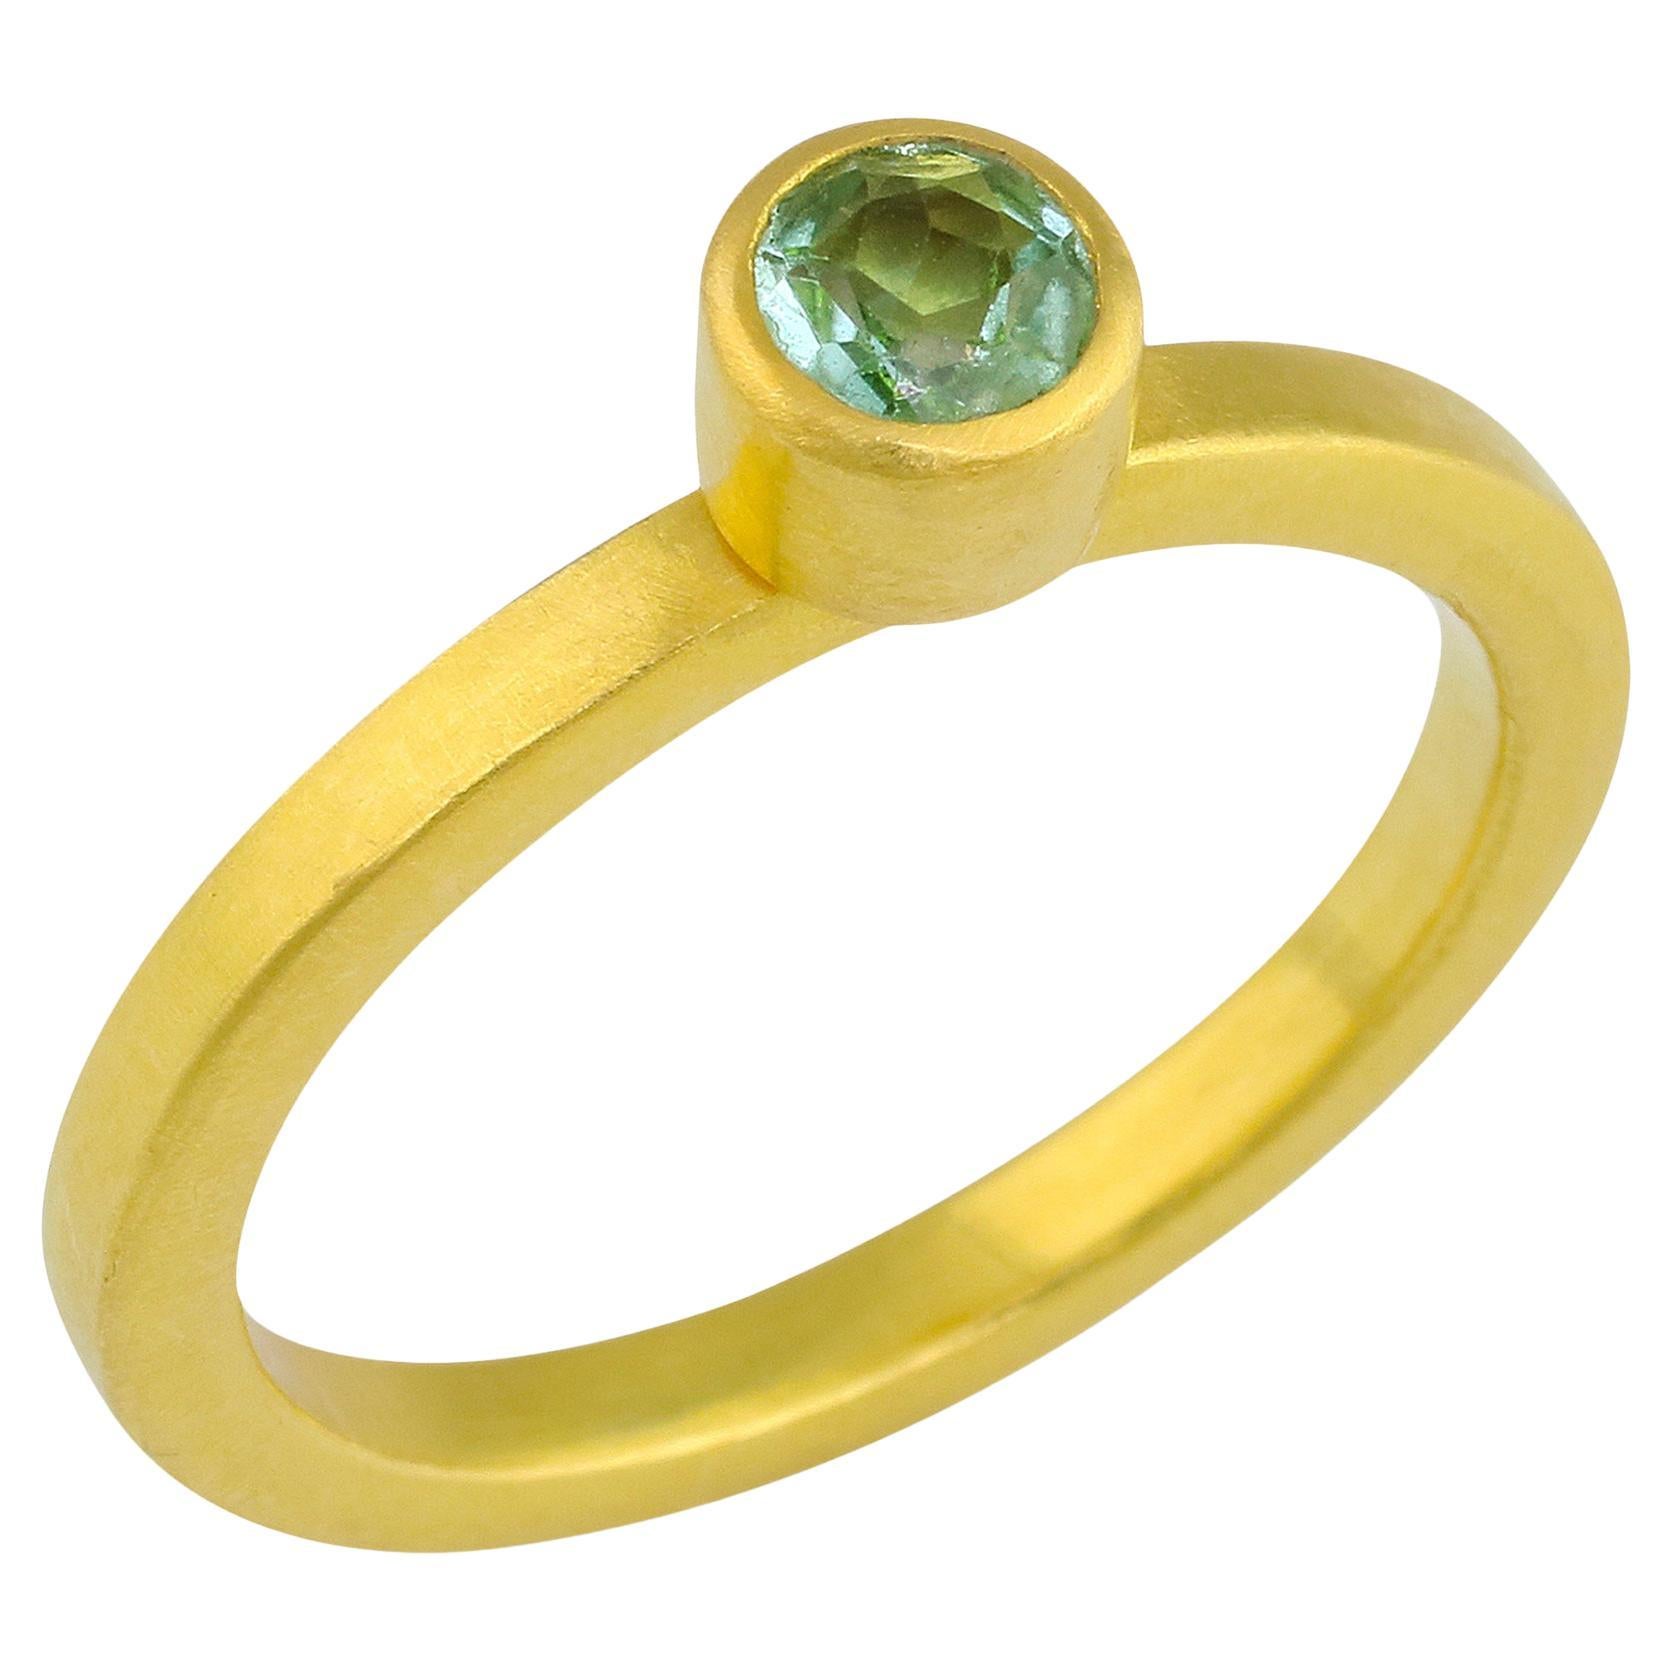 PHILIPPE SPENCER .30 Ct. Teal Tourmaline in 22K and 20K Gold Solitaire Ring For Sale